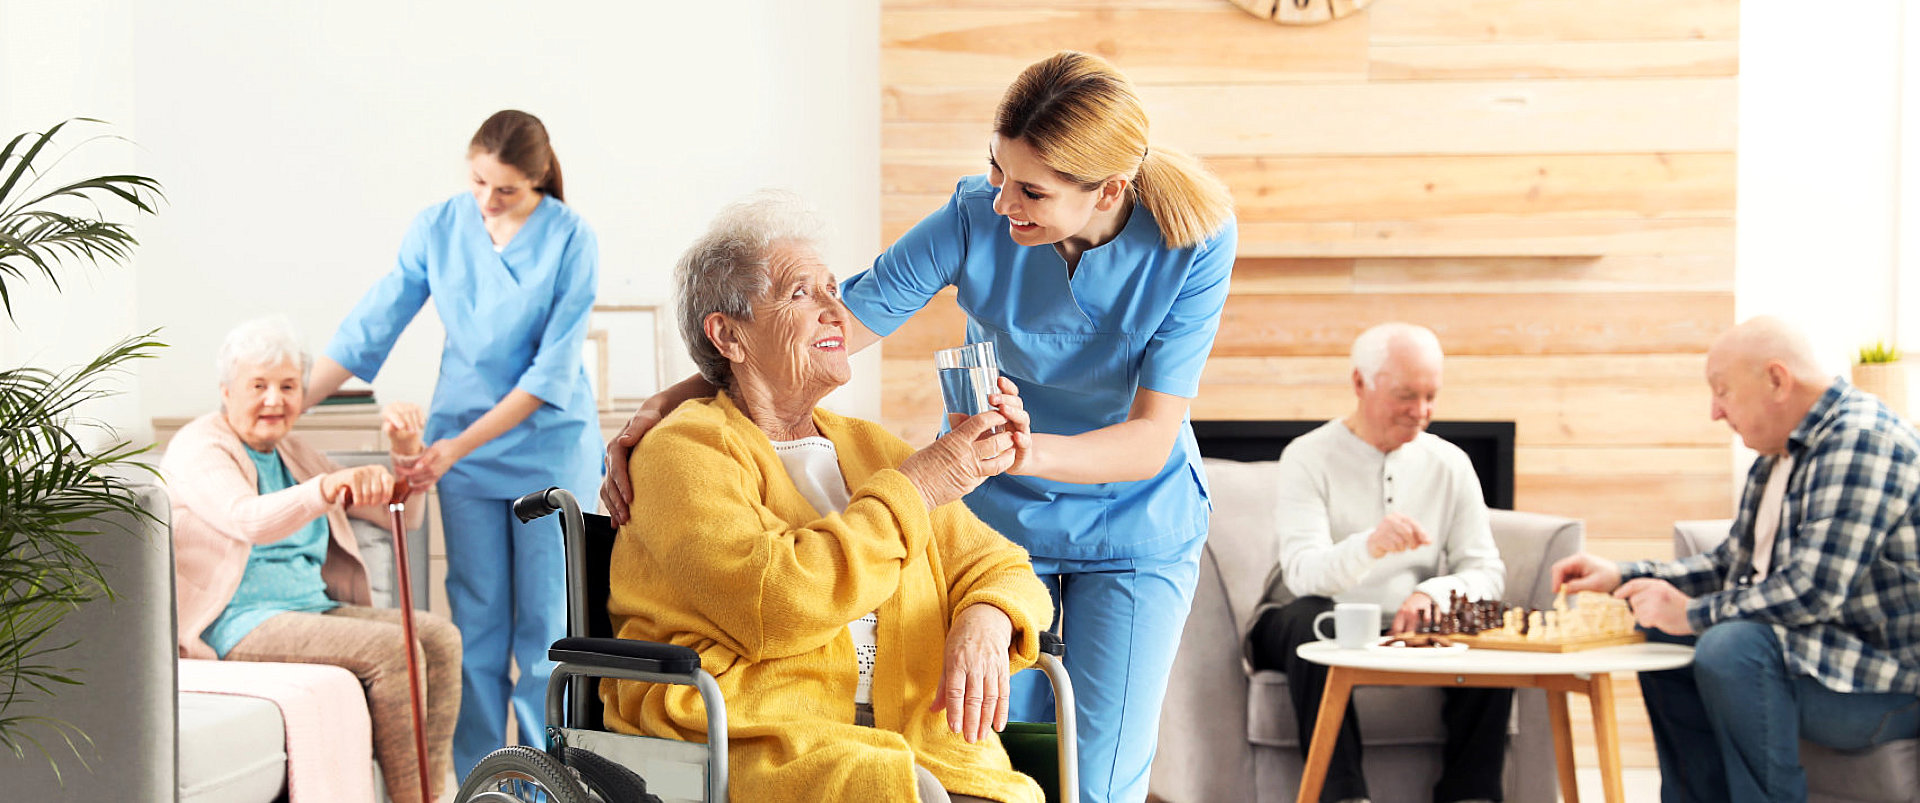 young caregiver assisting the senior woman